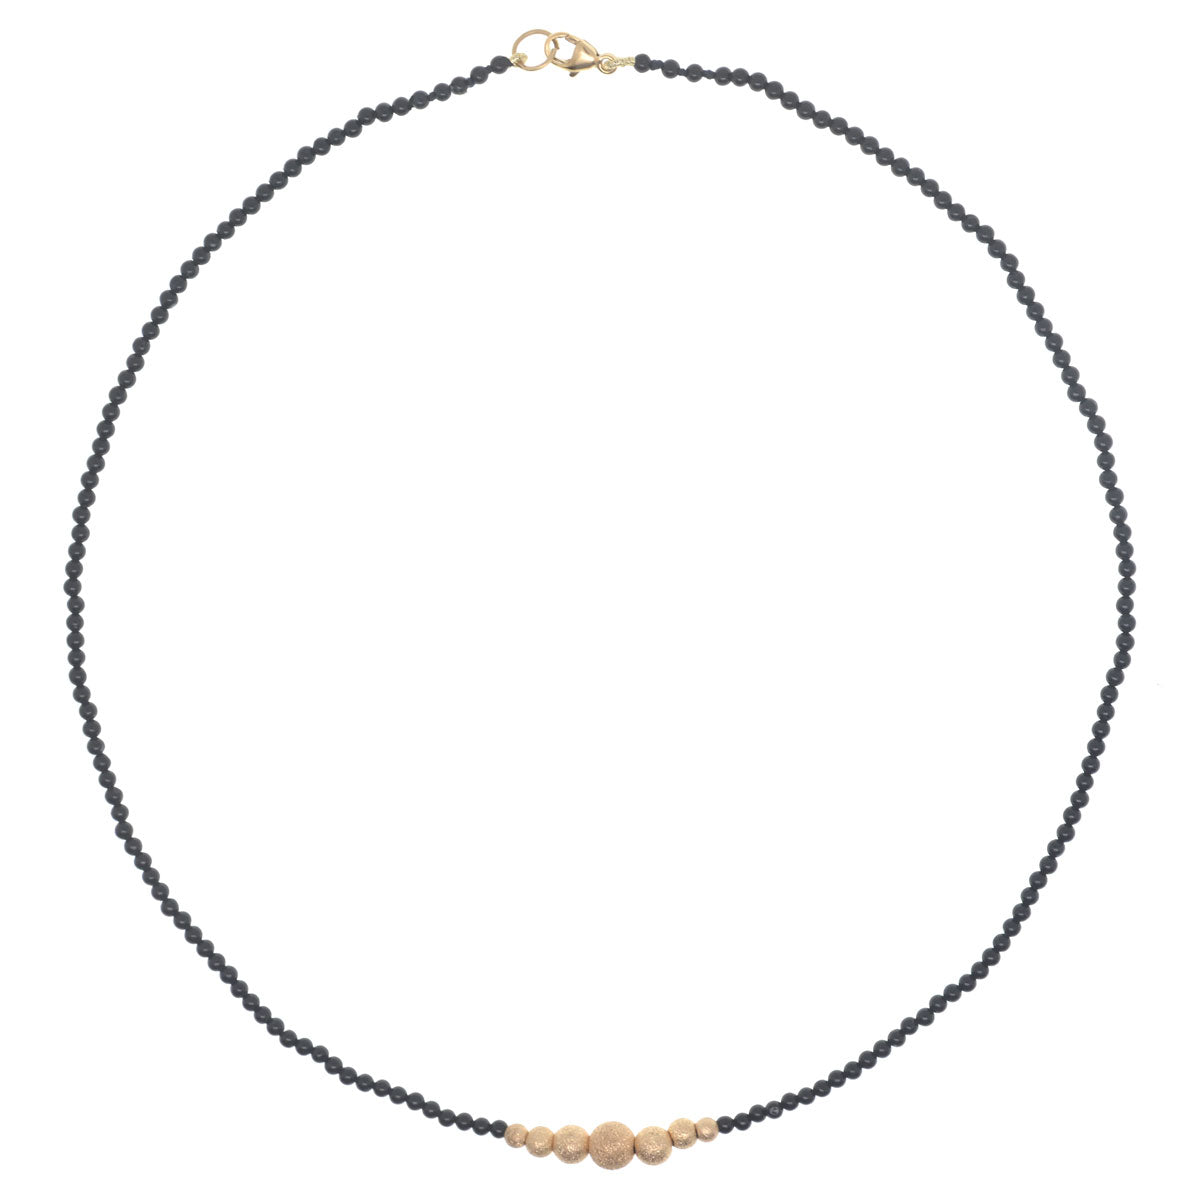 Mini Bubbles Necklace - Onyx and Dazzle Gold Beads